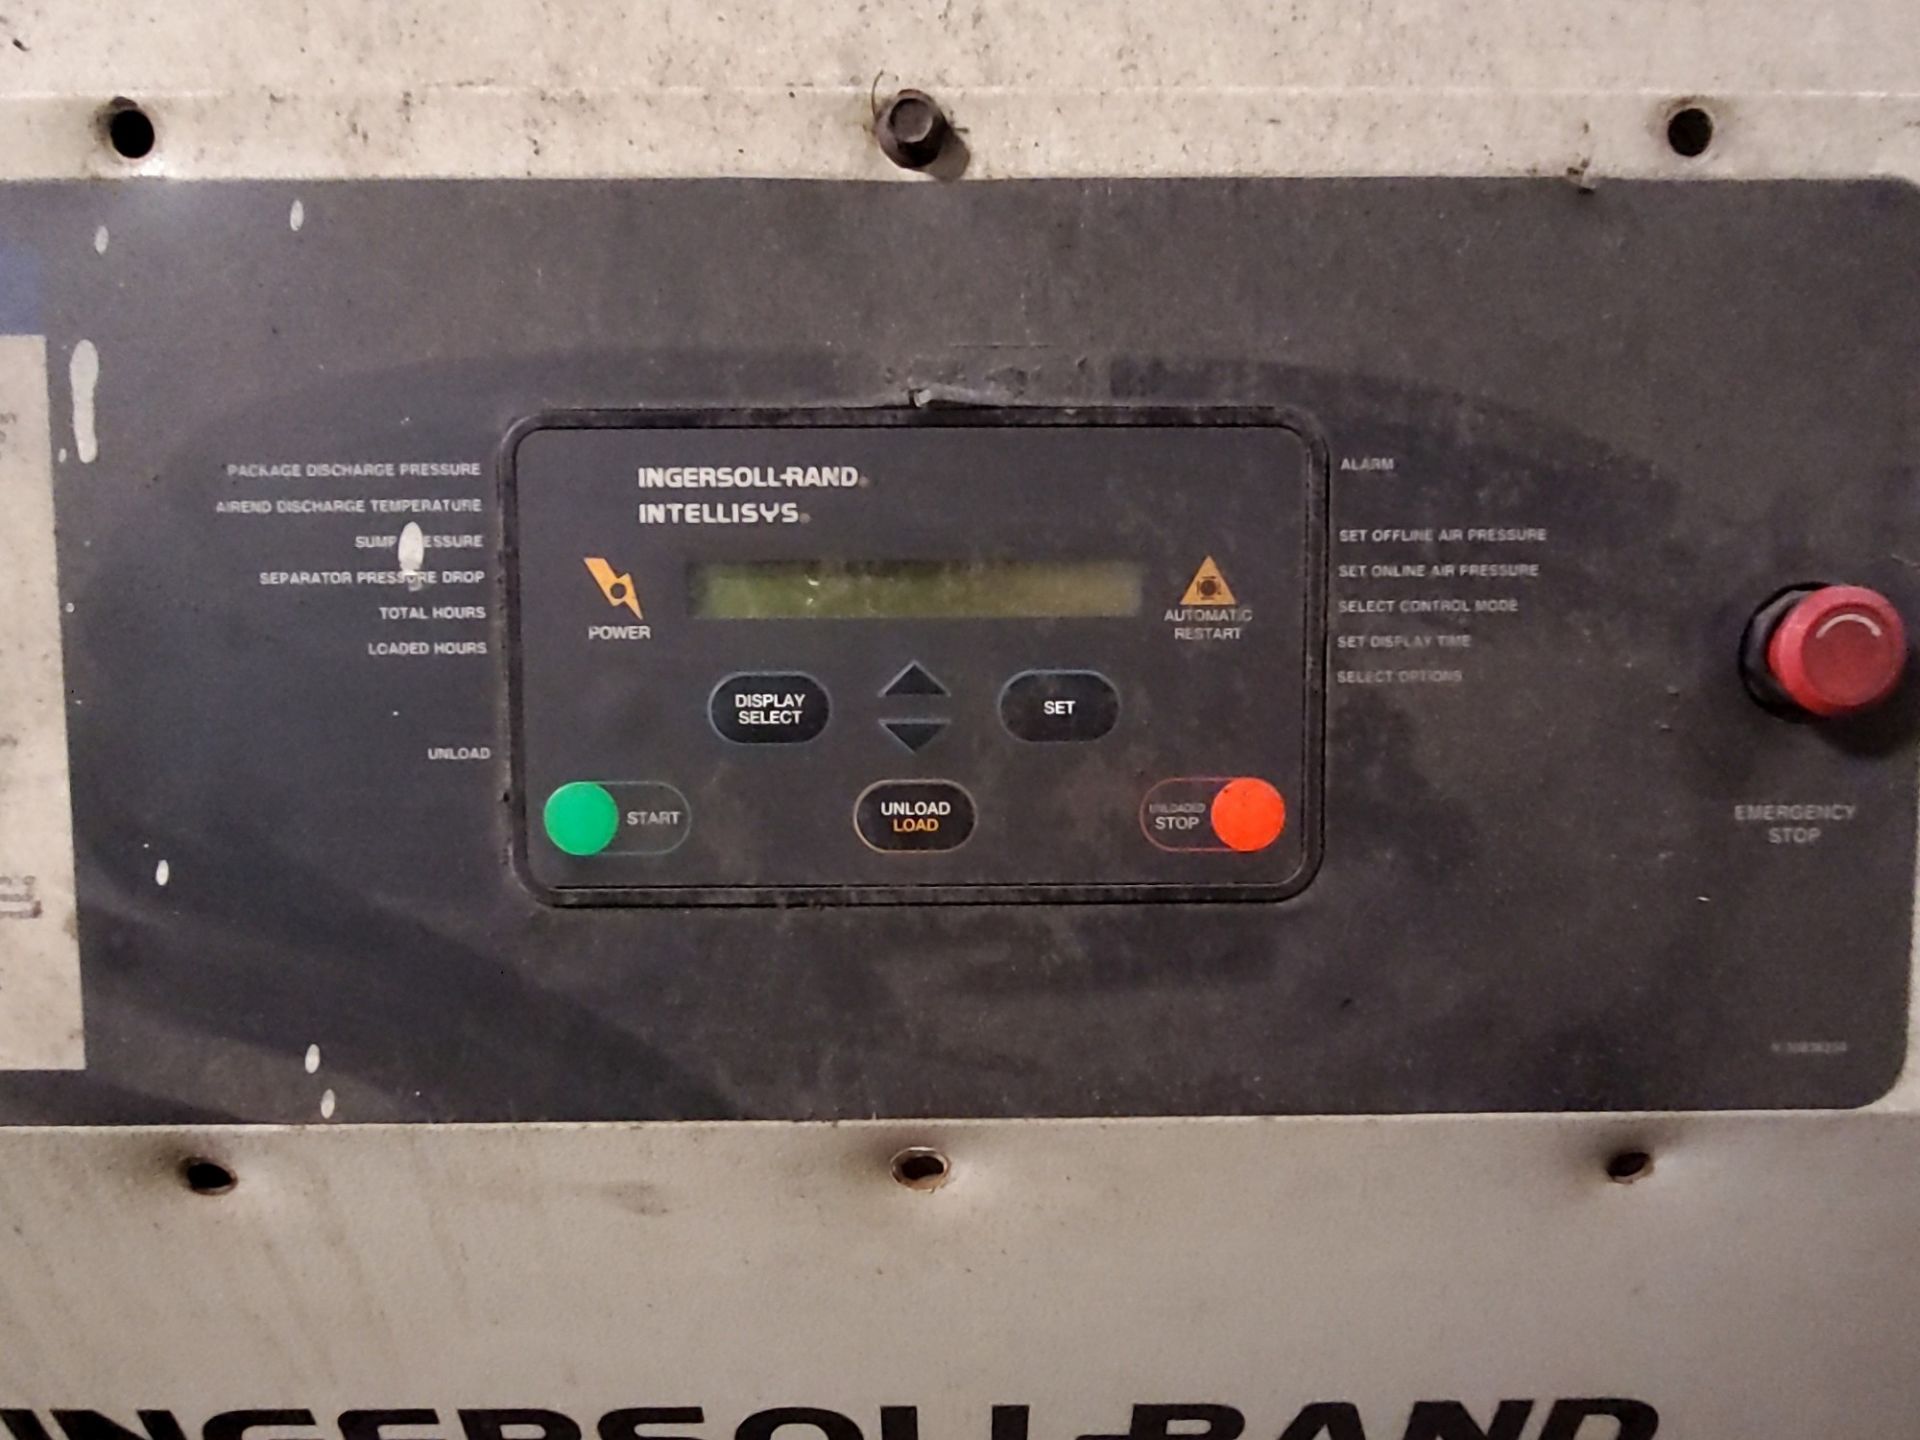 Ingersoll Rand SSR-EP40SE 127 Psi 157 CFM Rotary Screw Air Compressor - Image 5 of 6